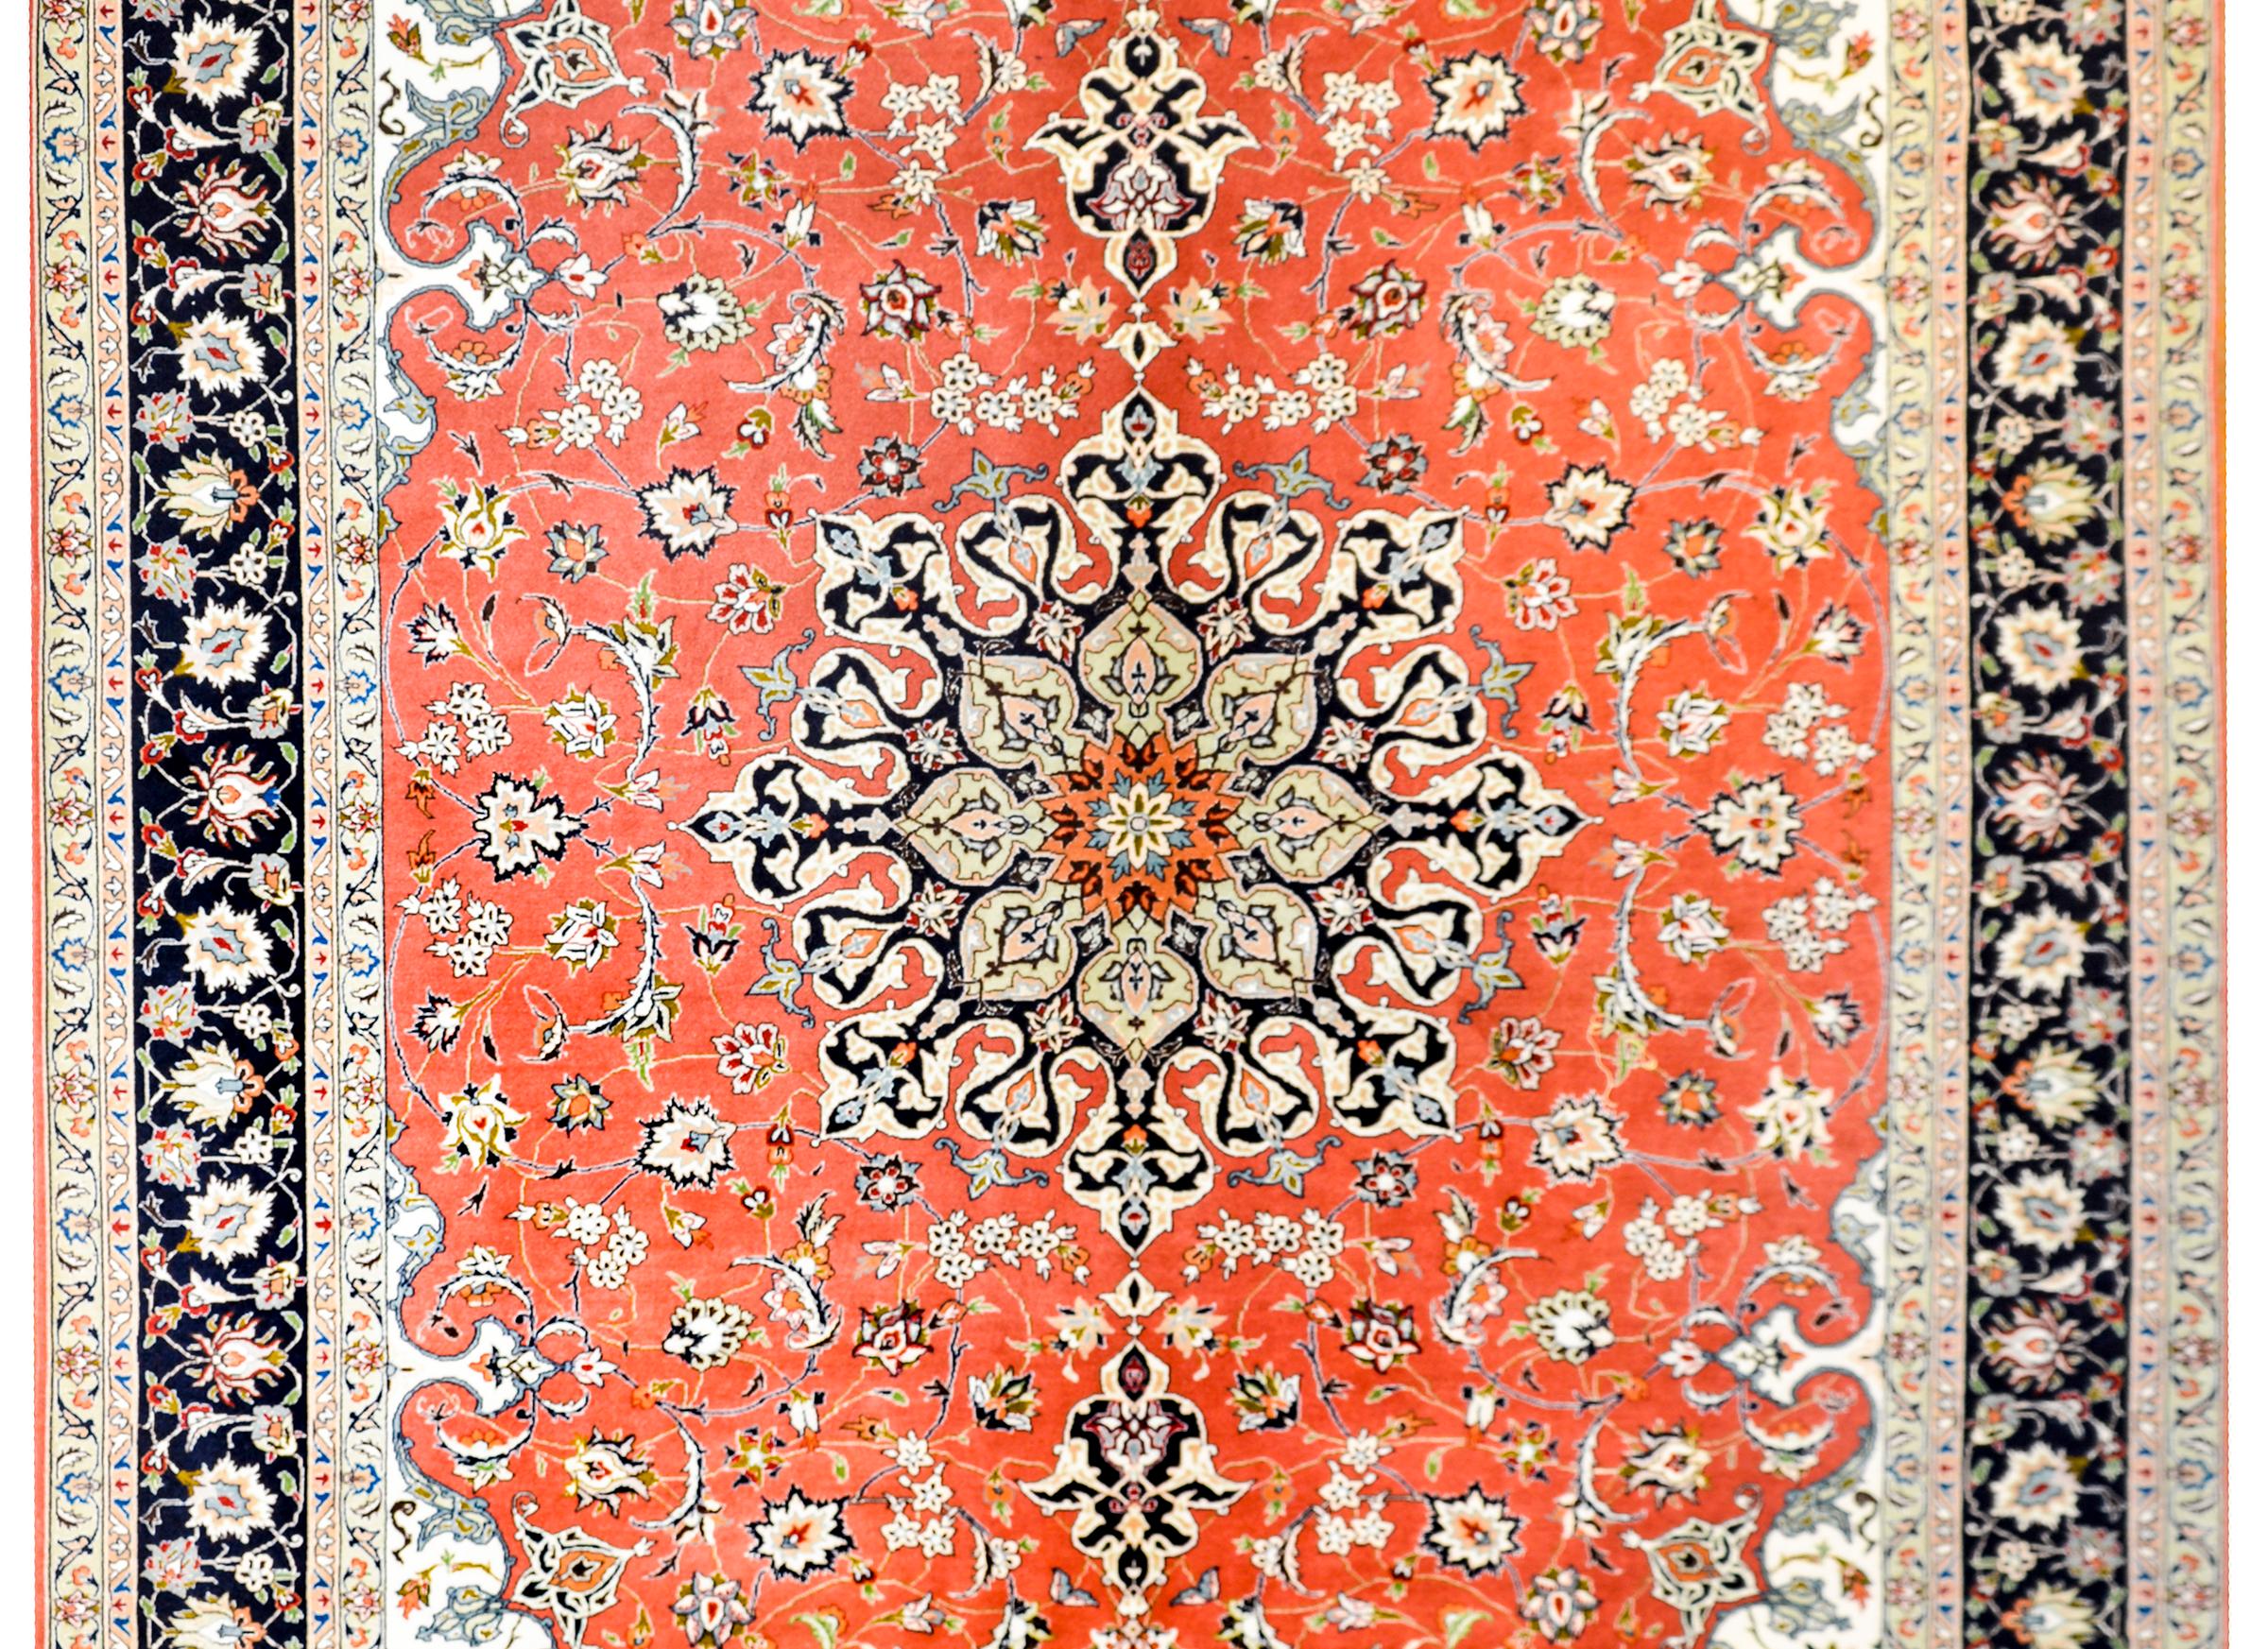 A Persian Tabriz rug with a wonderful large central floral medallion amidst a field of finely woven scrolling vines on an orange background, circa 1980s. The border is complex with multiple petite and large scale floral patterned borders.